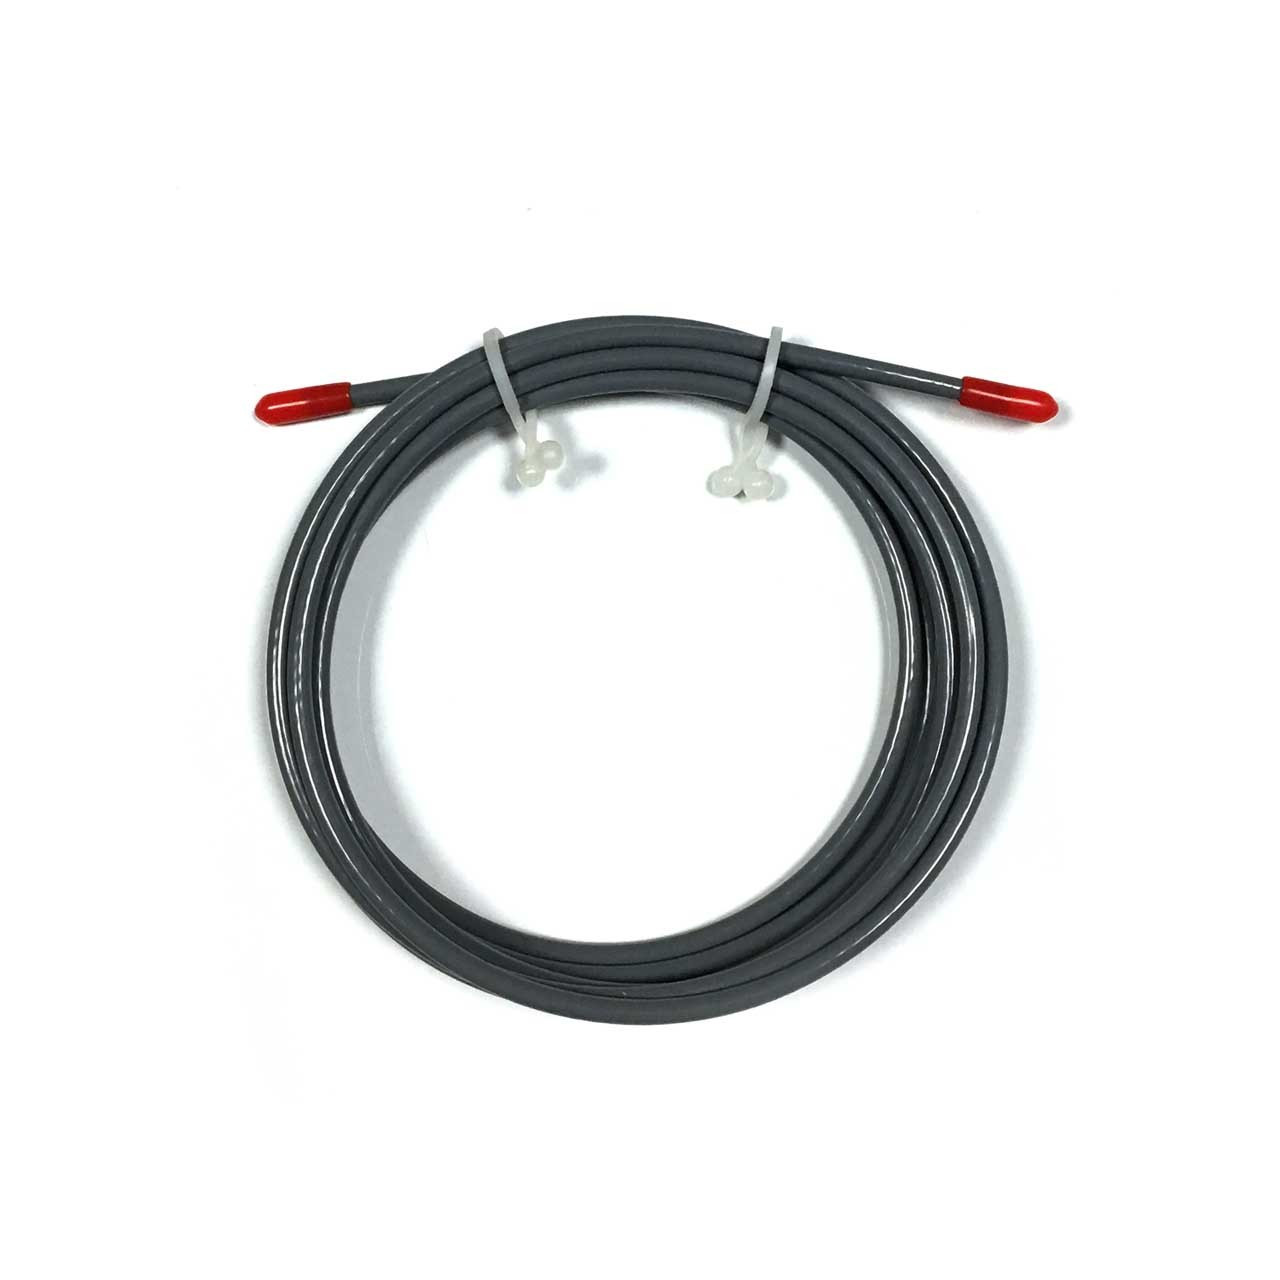 Rapid Fit Jump Rope